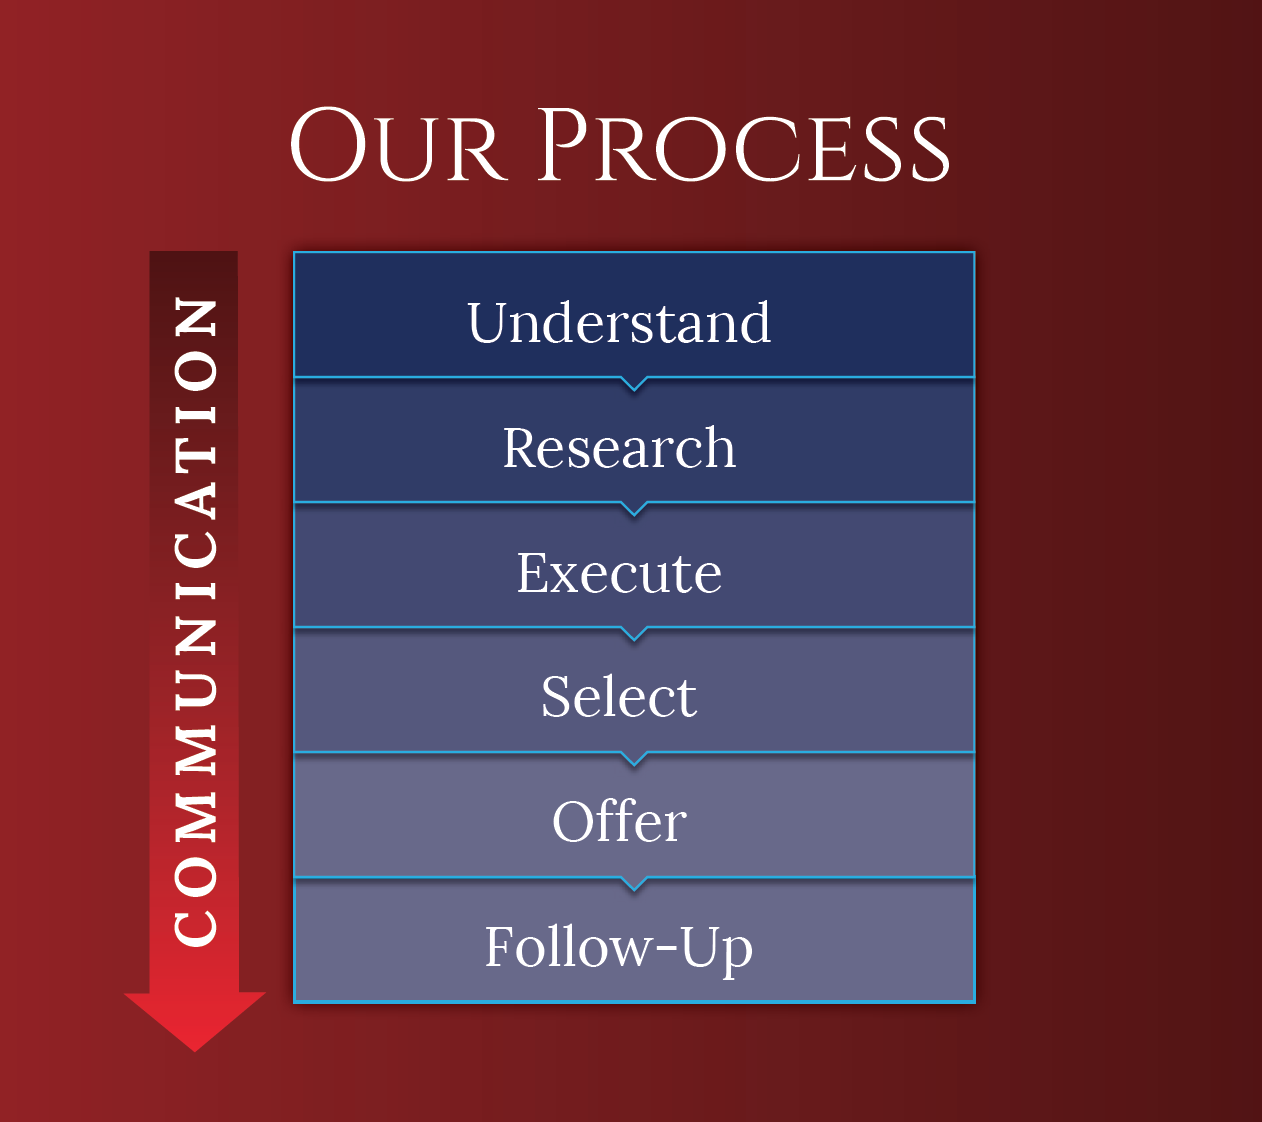 Our Process chart